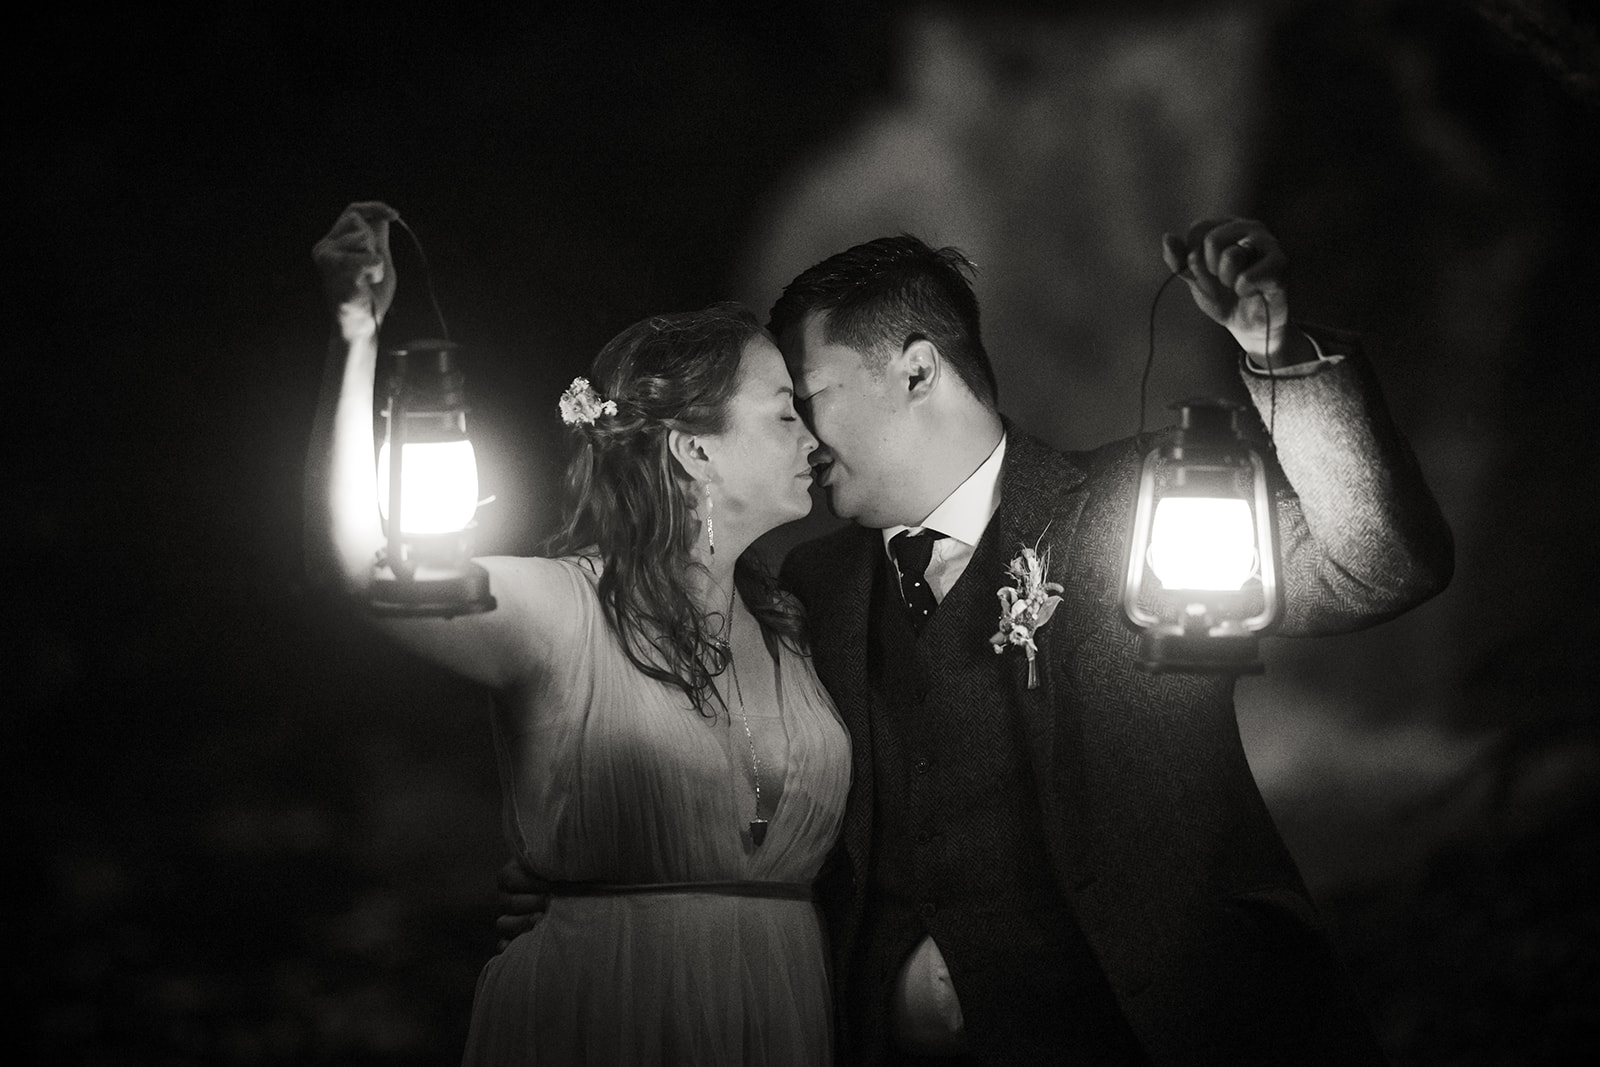 Mellie and Andrew pose for a photo with lanterns as their props for their Isle of Skye elopement photo shoot